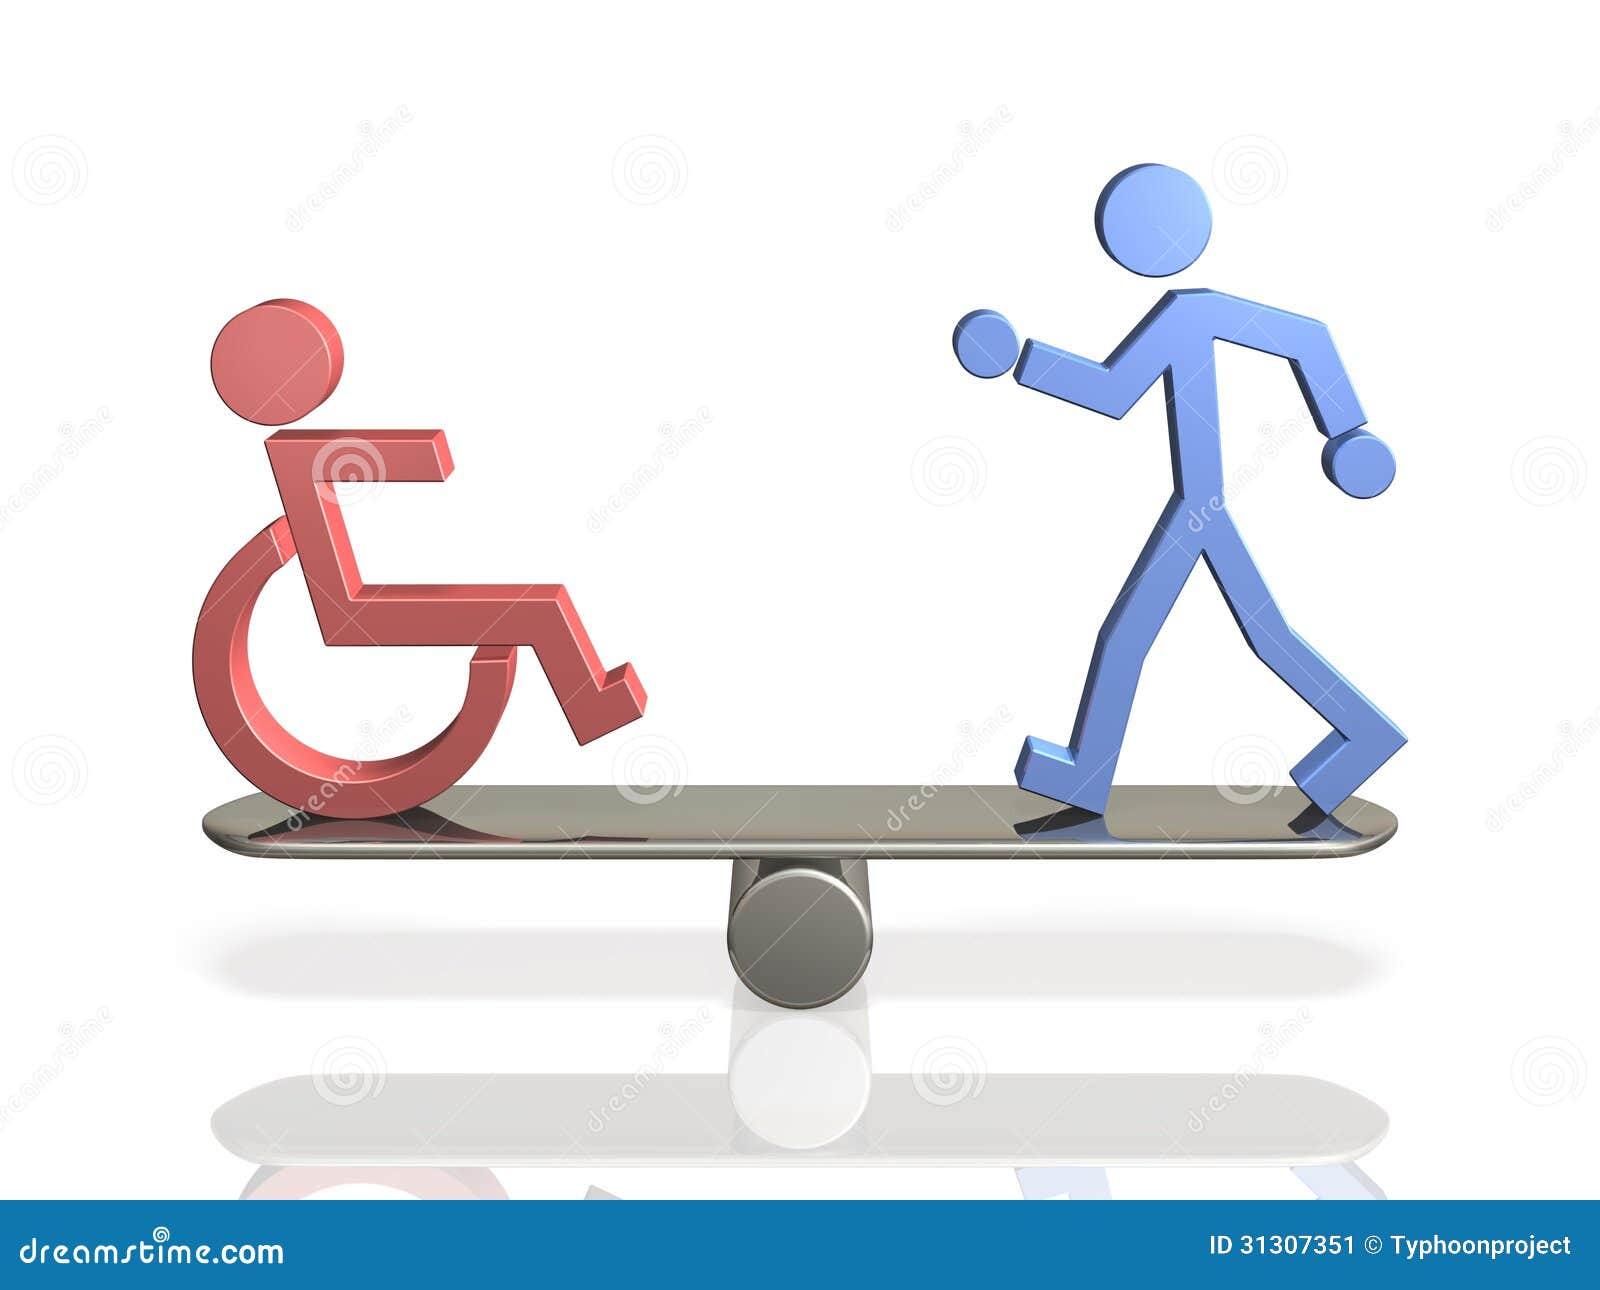 equal rights of people with disabilities and able